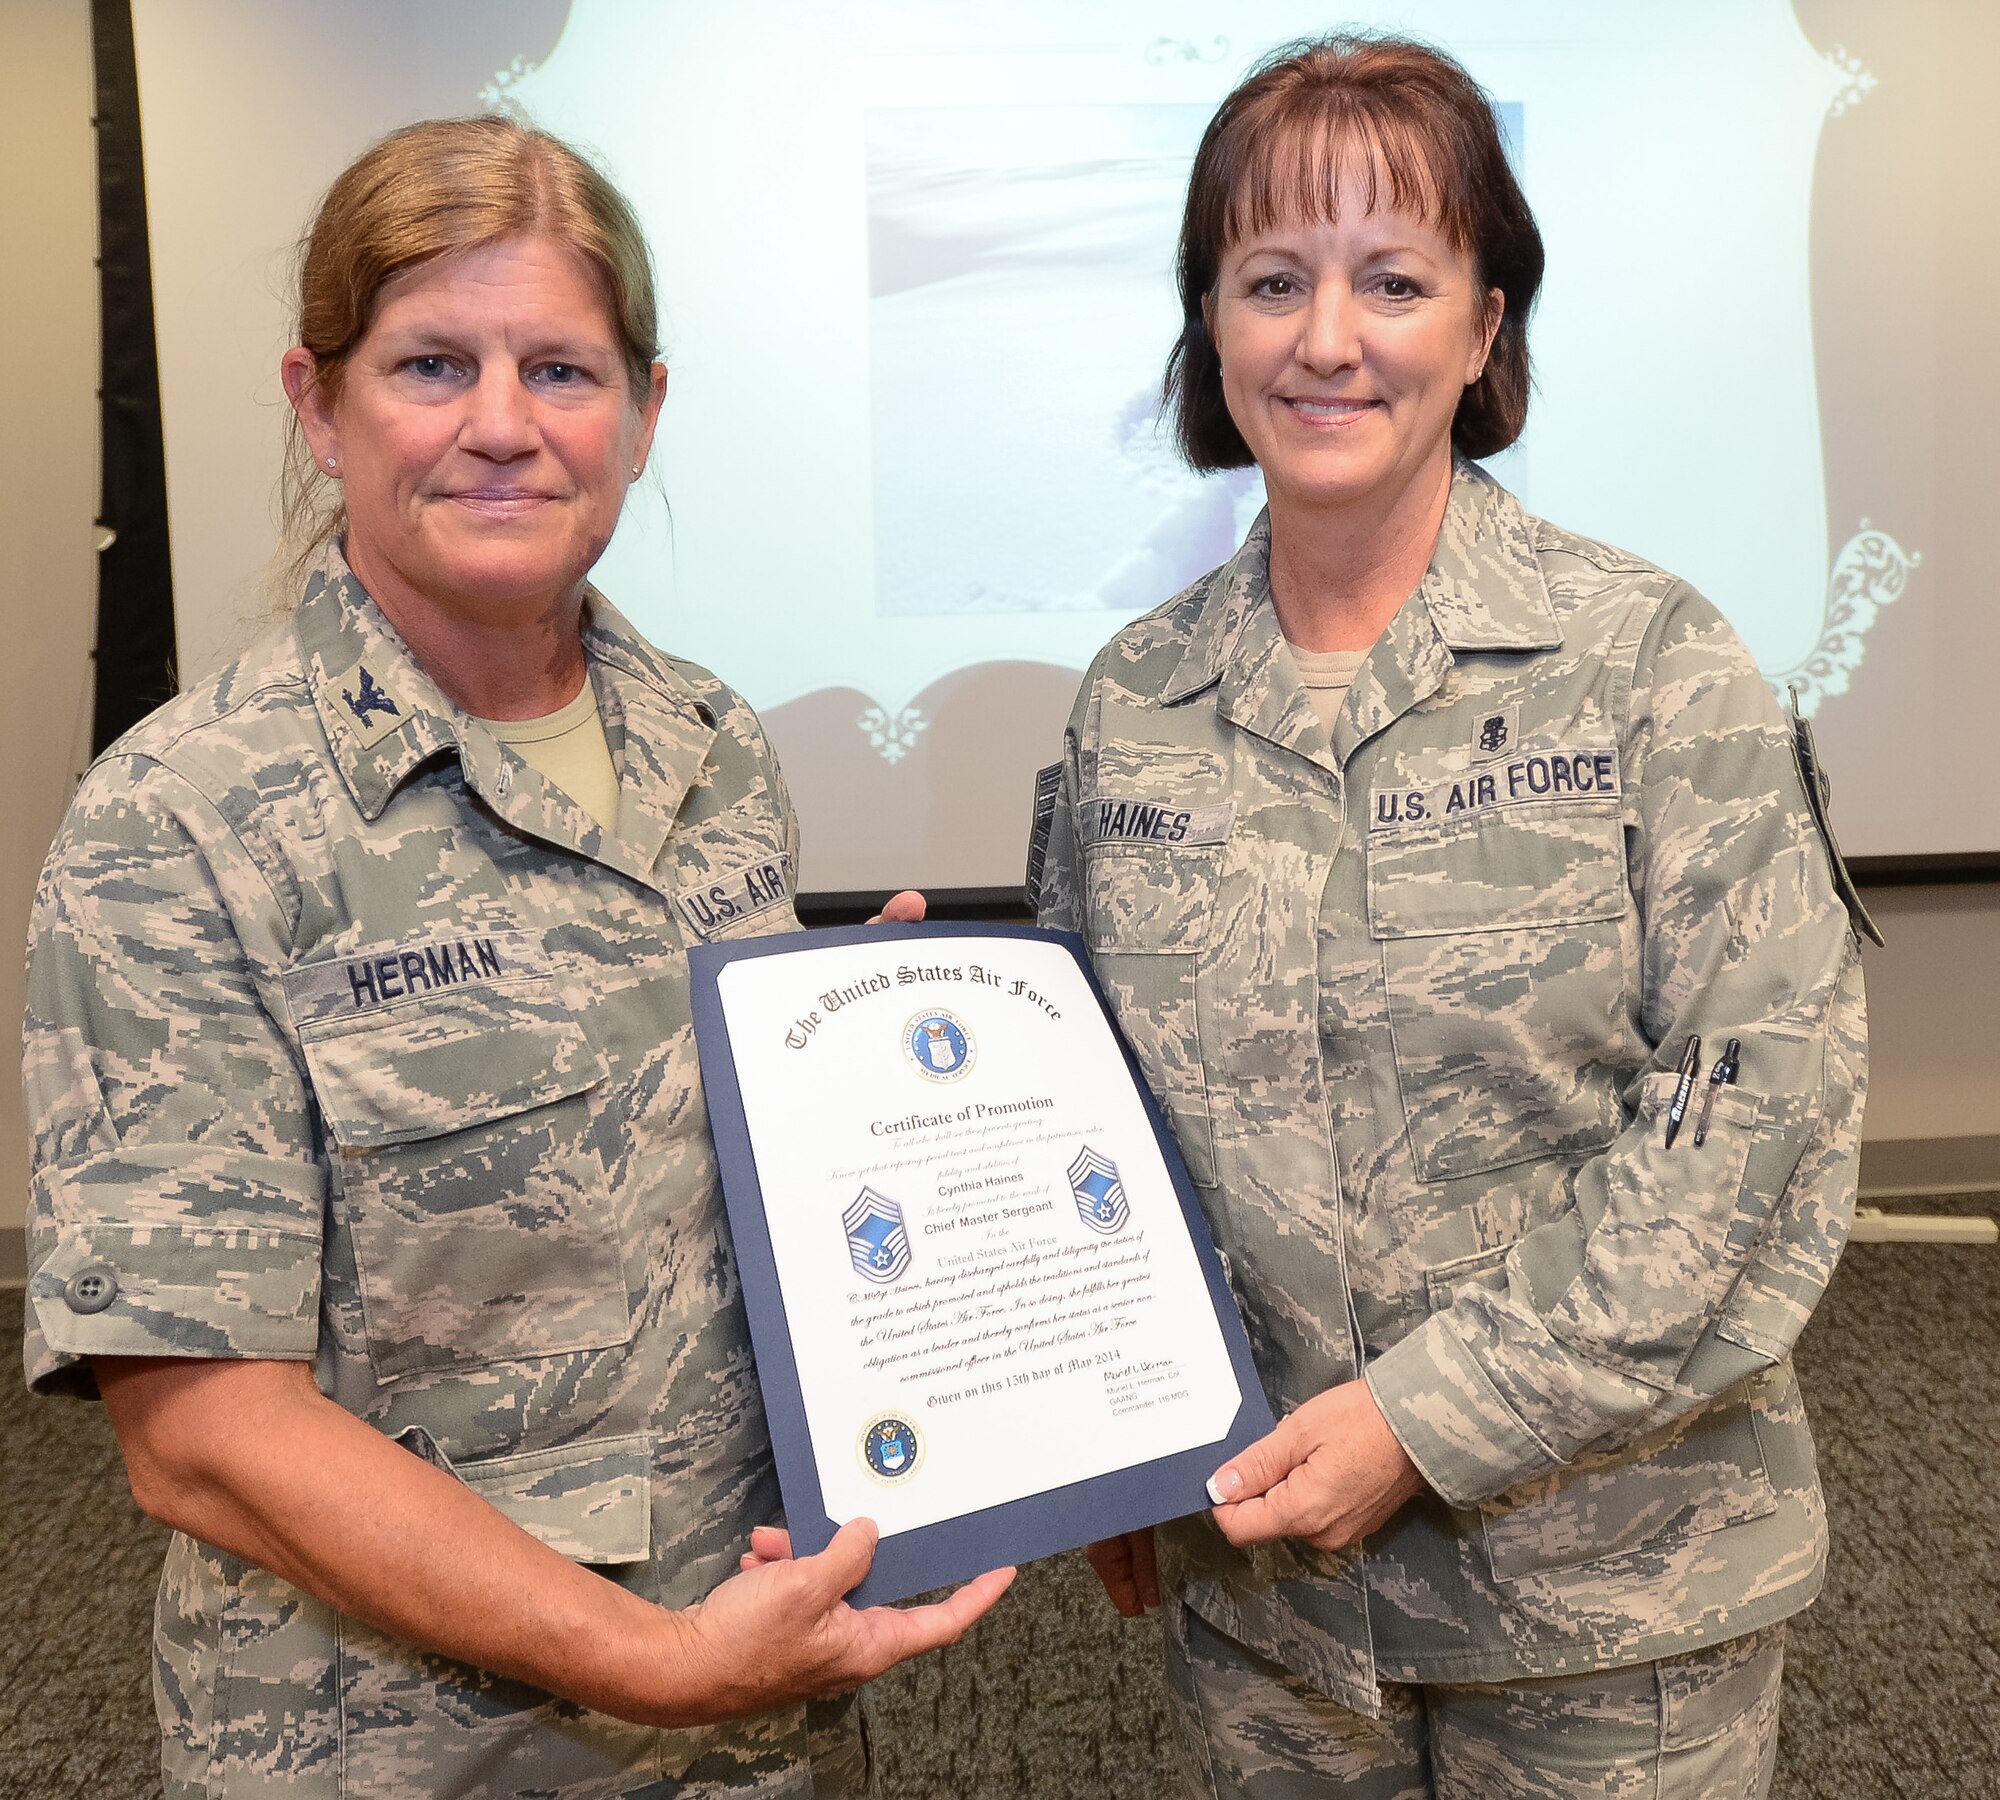 U.S. Air Force Col. Muriel Herman, 116th Medical Group (MDG) commander, Georgia Air National Guard, presents Chief Master Sgt. Cynthia Haines a certificate of promotion to the rank of Chief Master Sgt., Robins Air Force Base, Ga., June 21, 2014. Haines became the first female to be promoted to Chief Master Sgt. in the history of the 116th MDG. The 116th MDG is the medical arm of the 116th Air Control Wing.  (U.S. Air National Guard photo by Master Sgt. Roger Parsons/Released)

